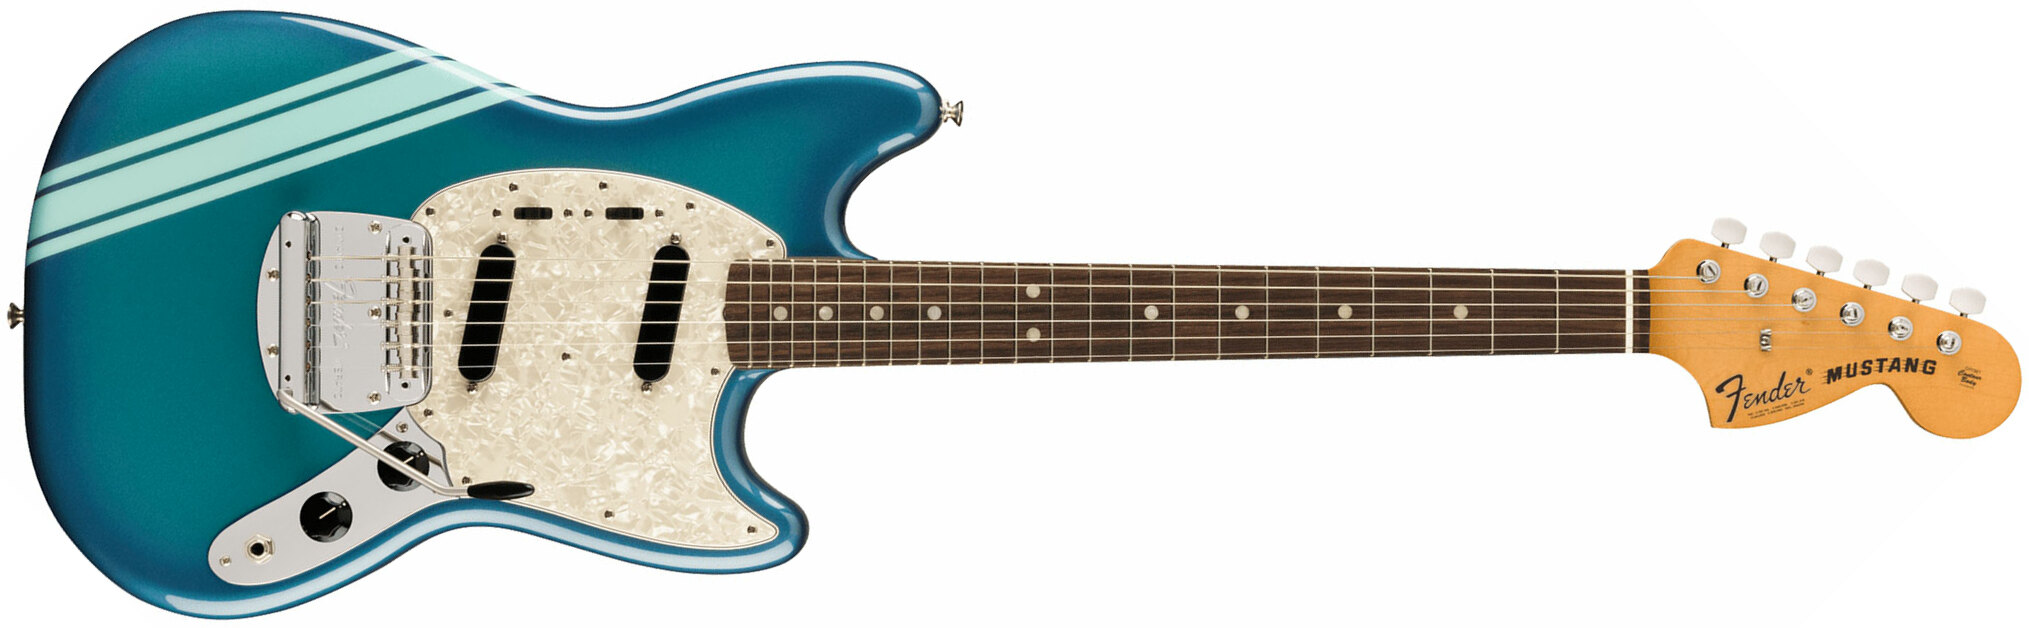 Fender Mustang 70s Competition Vintera 2 Mex 2s Trem Rw - Competition Blue - Guitarra electrica retro rock - Main picture